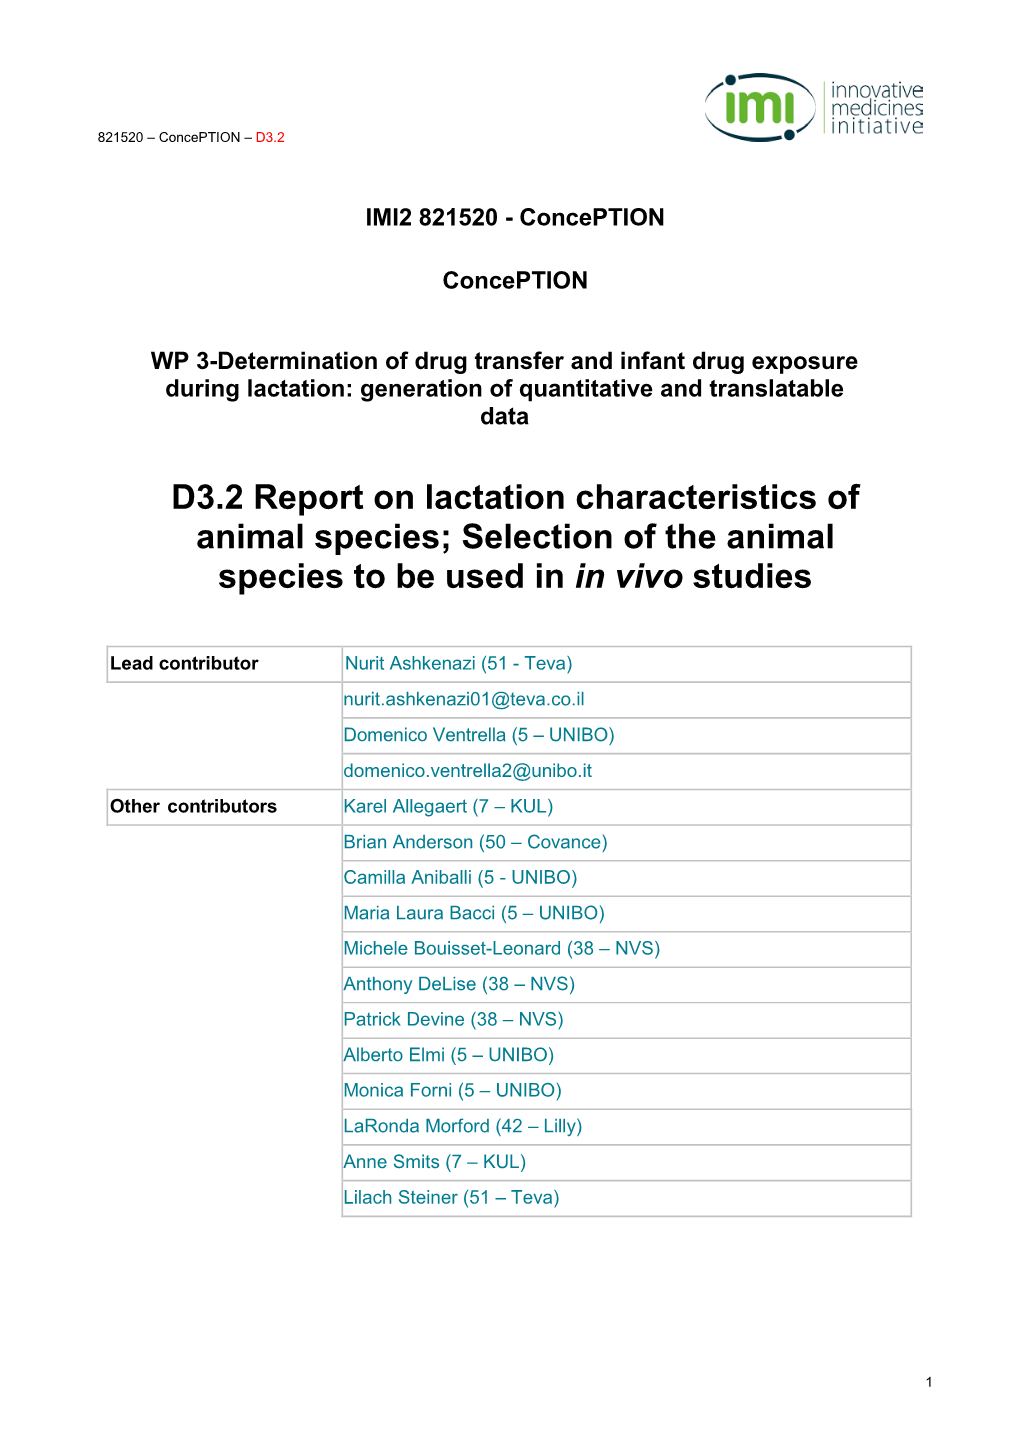 D3.2 Report on Lactation Characteristics of Animal Species; Selection of the Animal Species to Be Used in in Vivo Studies